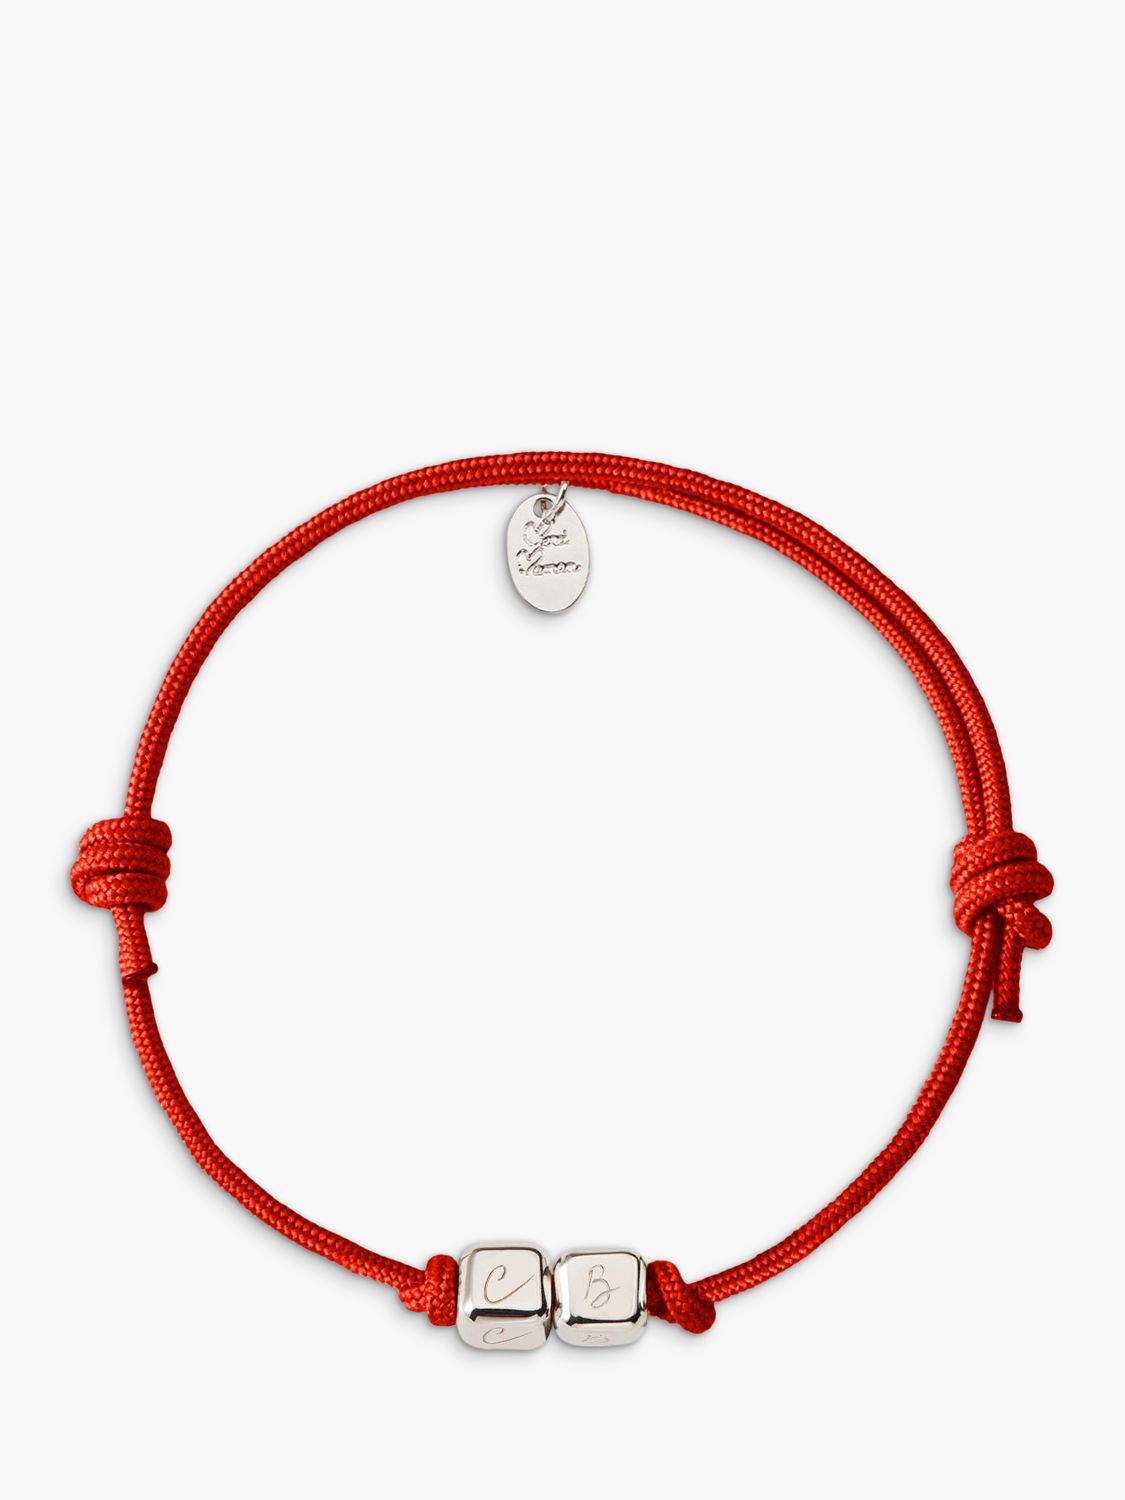 Merci Maman Personalised 2 Dice Braided Bracelet, Red/Silver